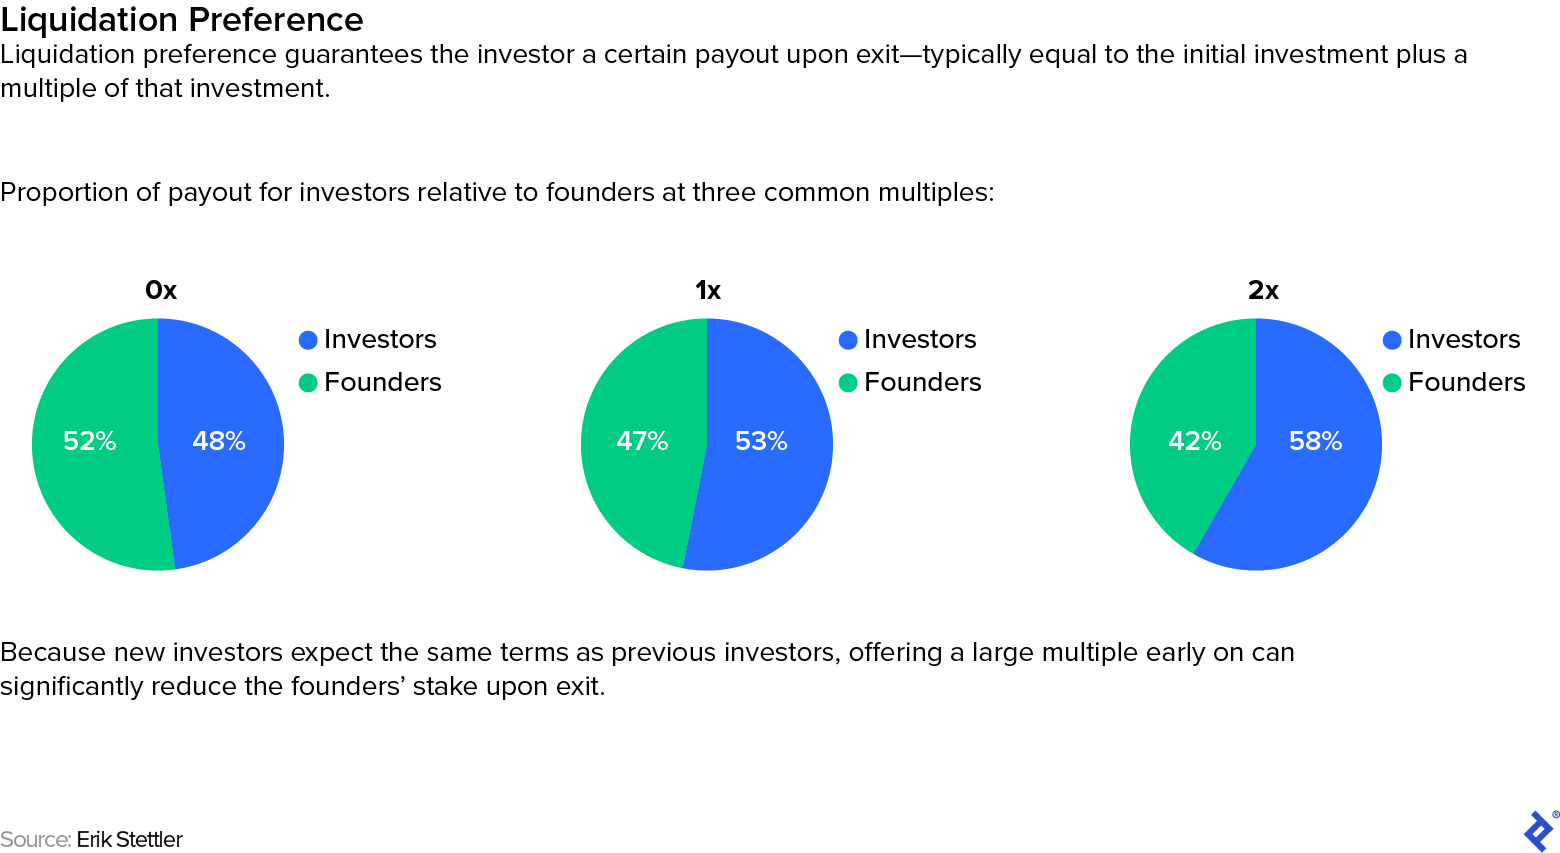 The higher the multiple early investors receive, the less the team gets at the end. These pie charts show how team equity declines as a result.